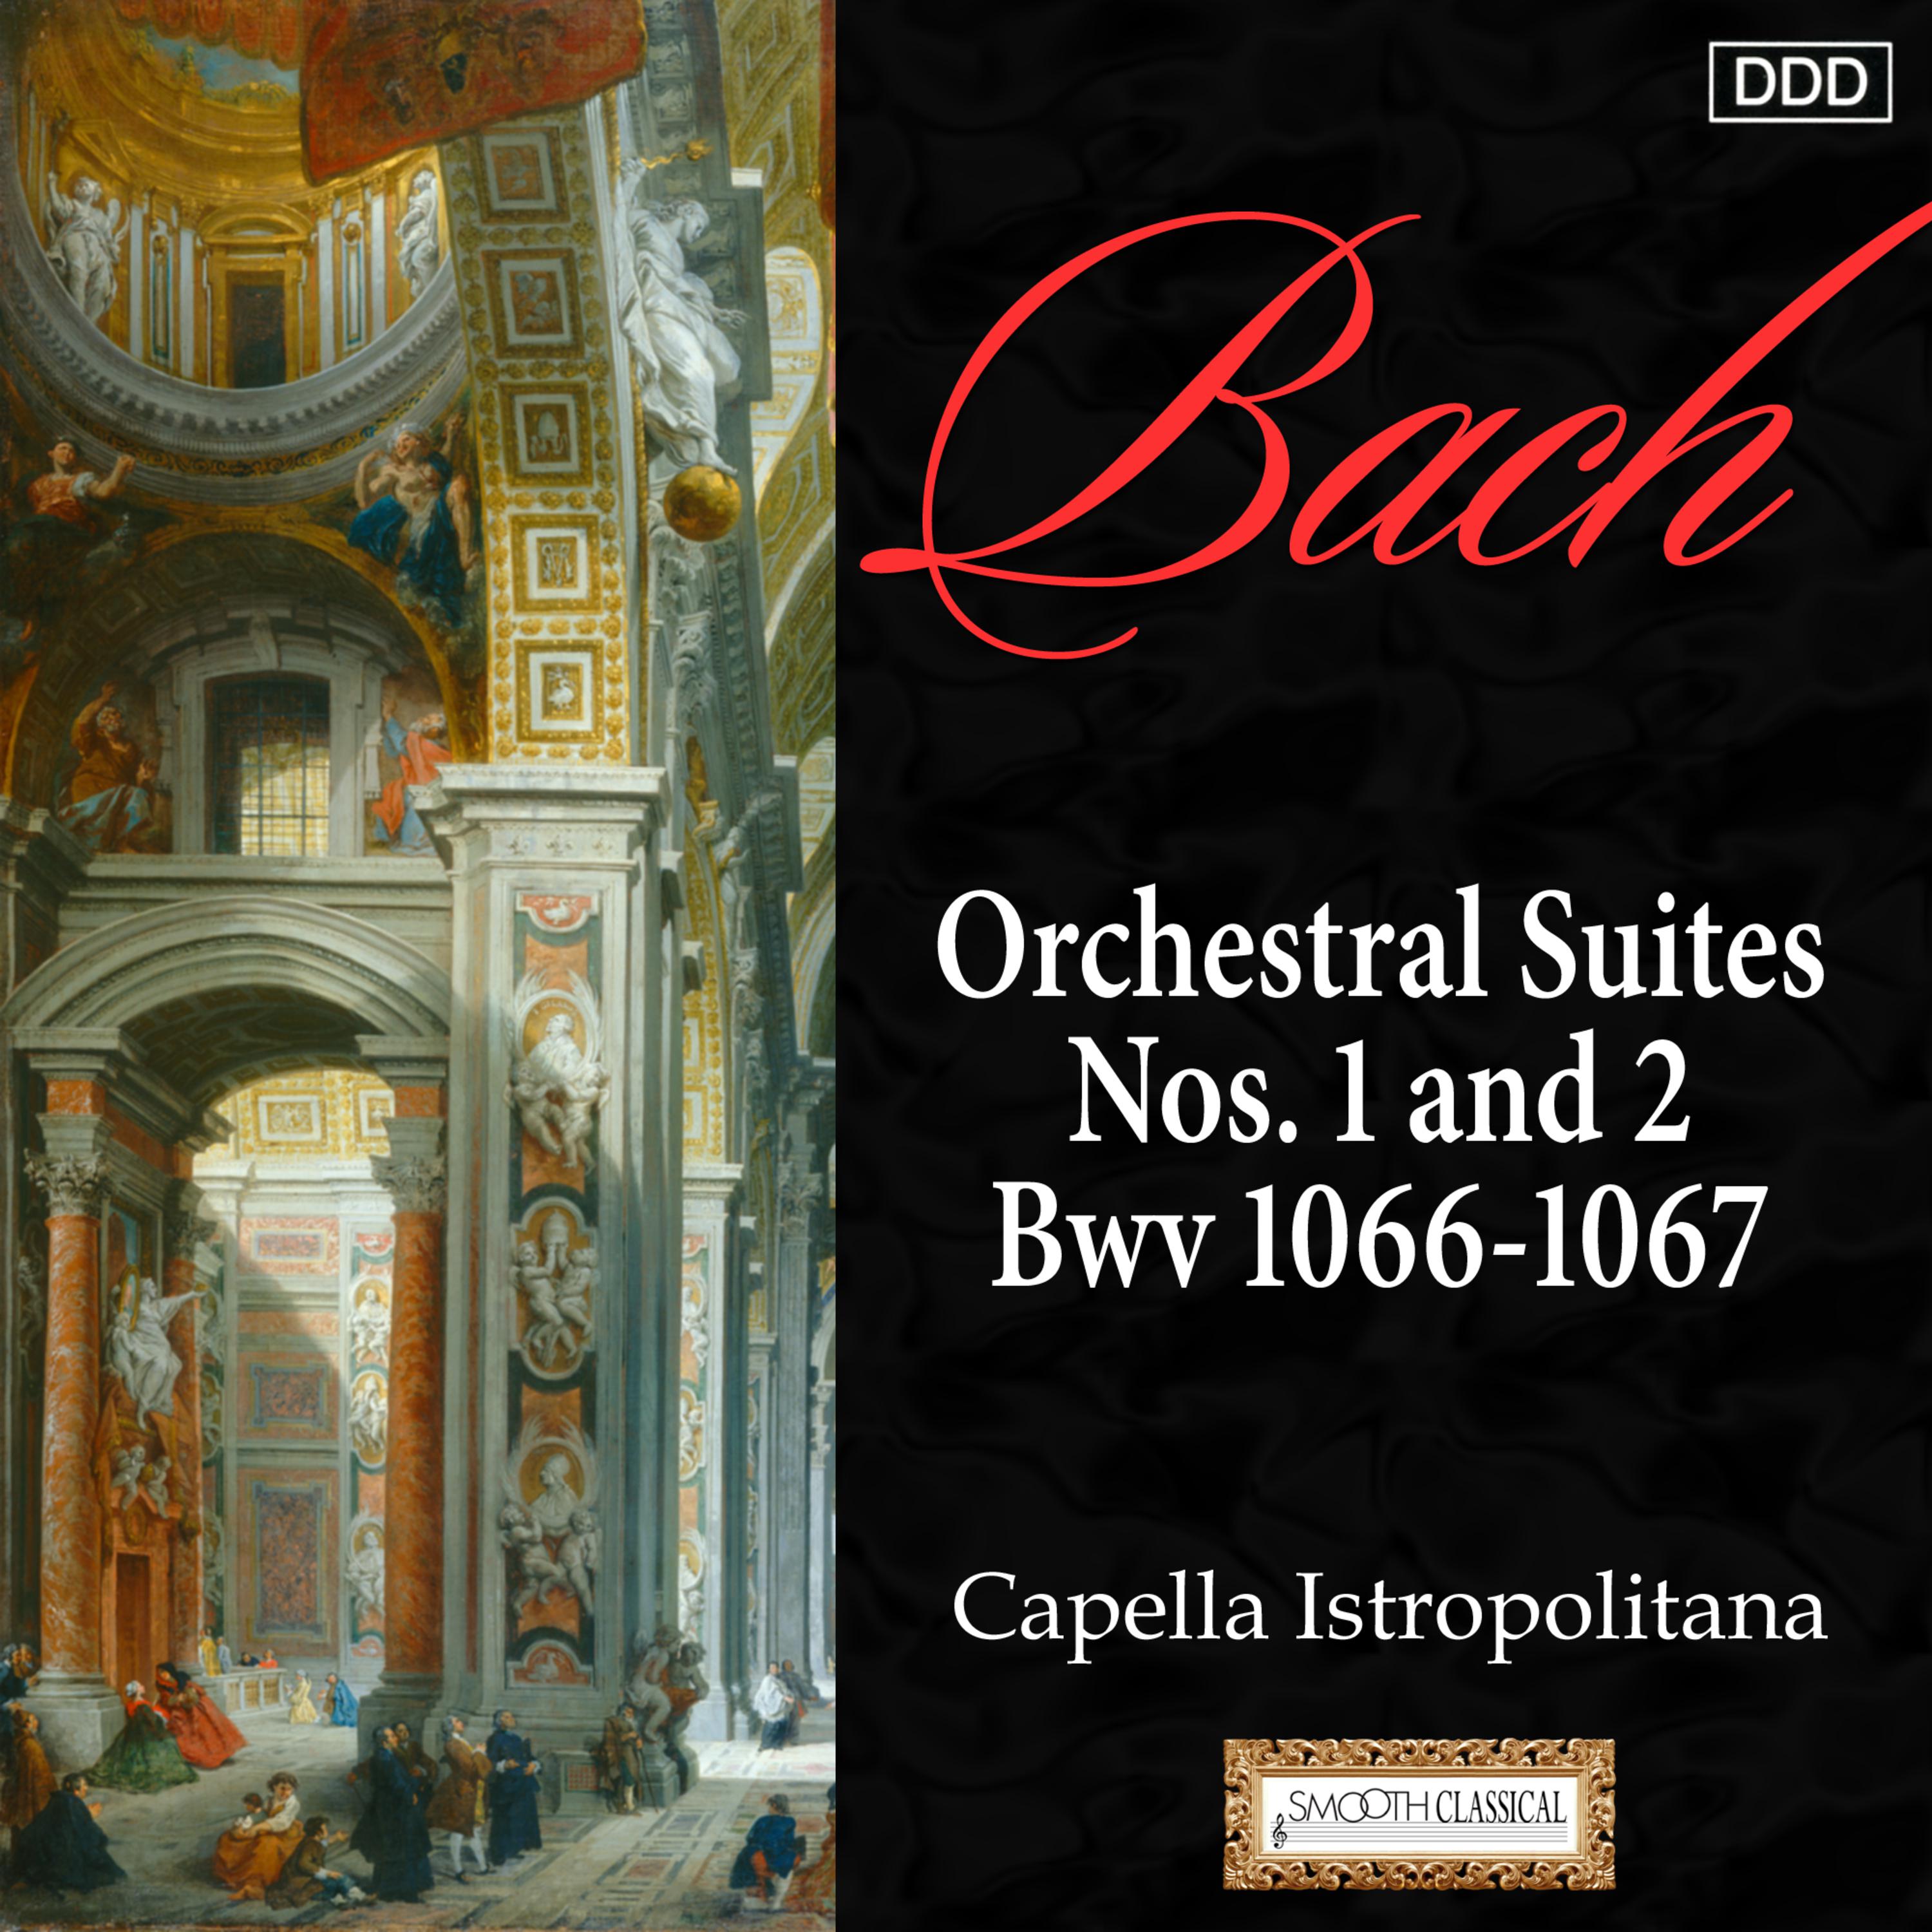 Orchestral Suite No. 1 in C Major, BWV 1066: VI. Bourree I and II